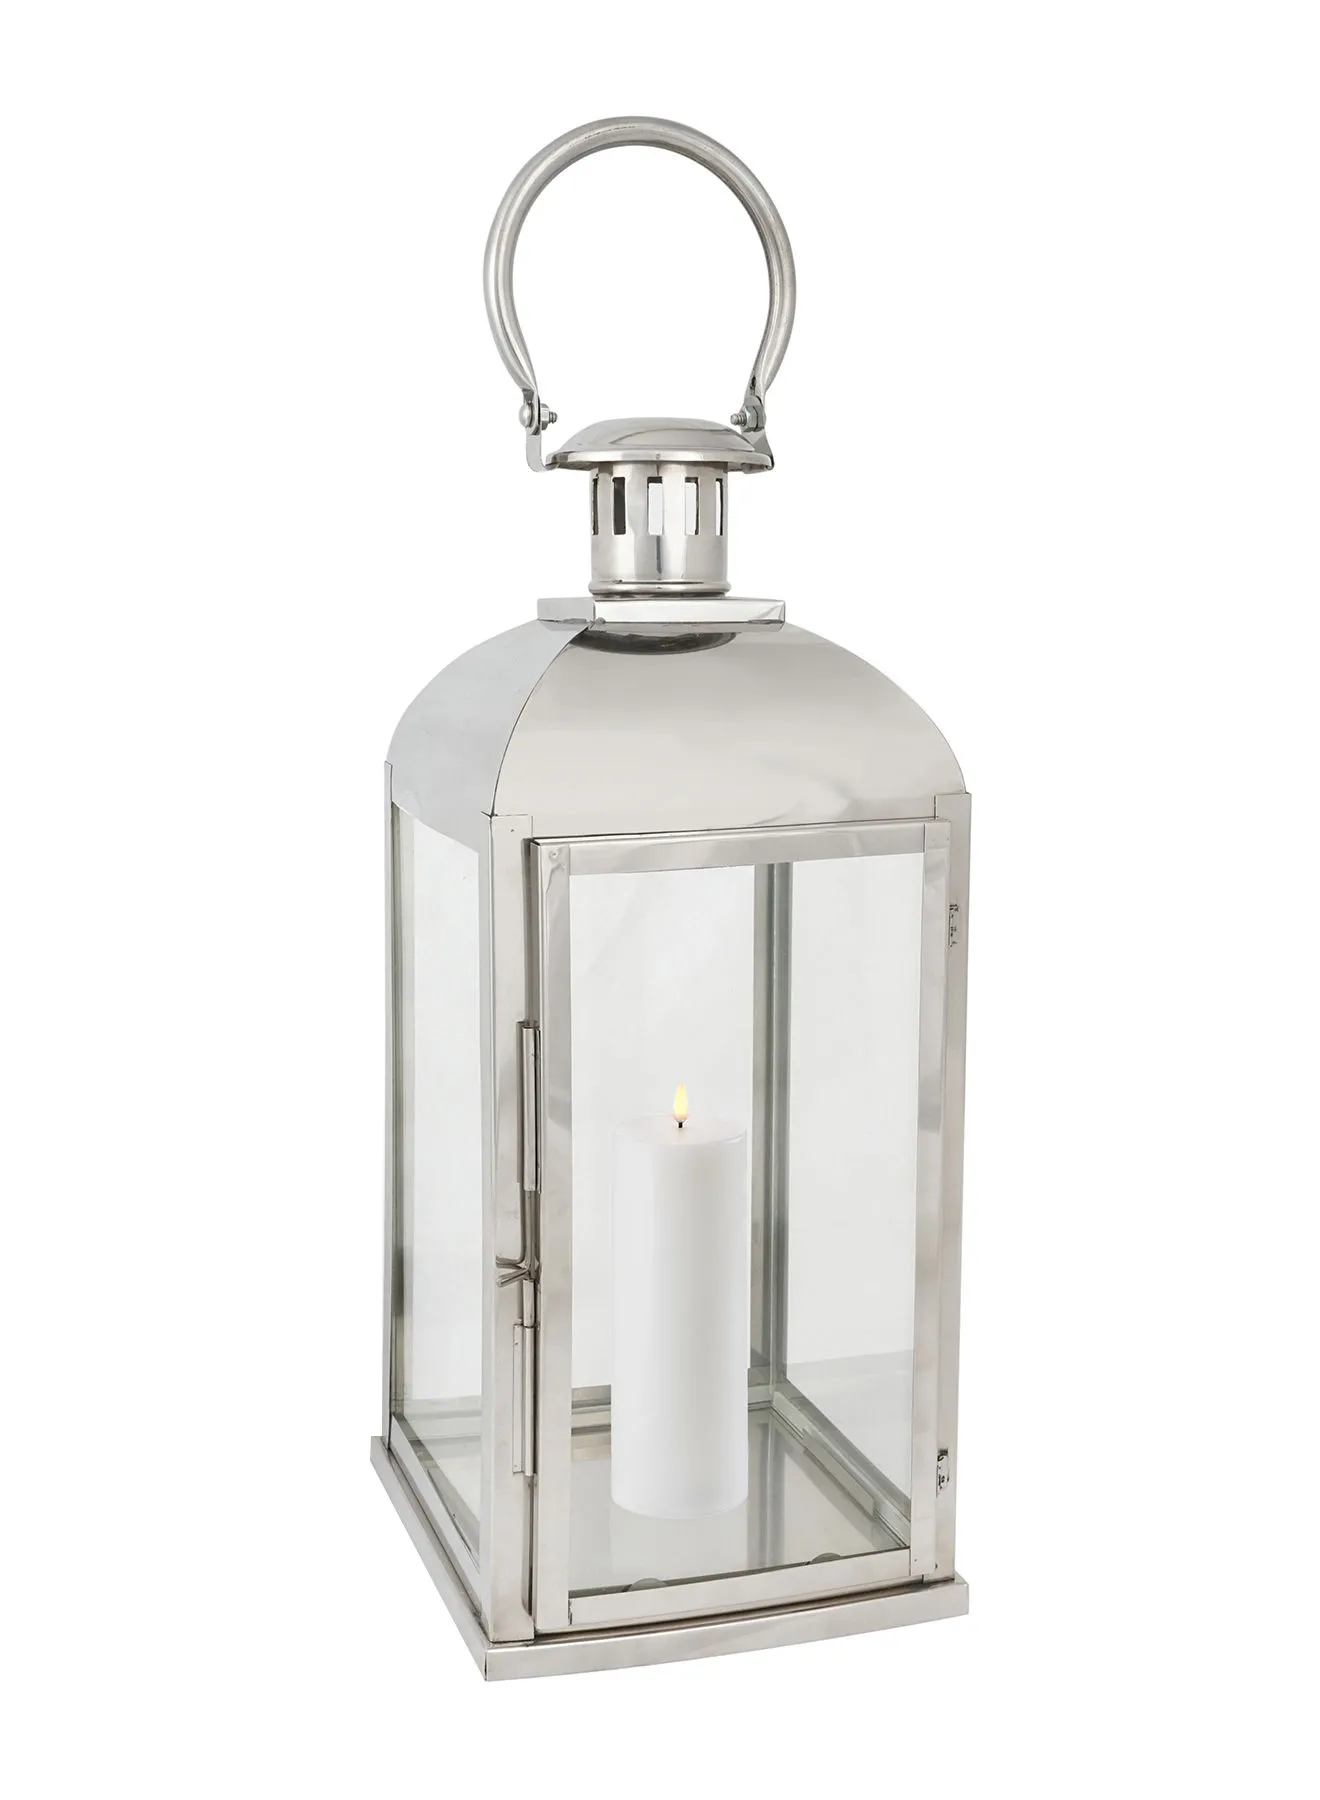 ebb & flow Modern Ramadan Candle Lantern With Glass Unique Luxury Quality Scents For The Perfect Stylish Home Silver 16.5 x 16.5 x 40centimeter